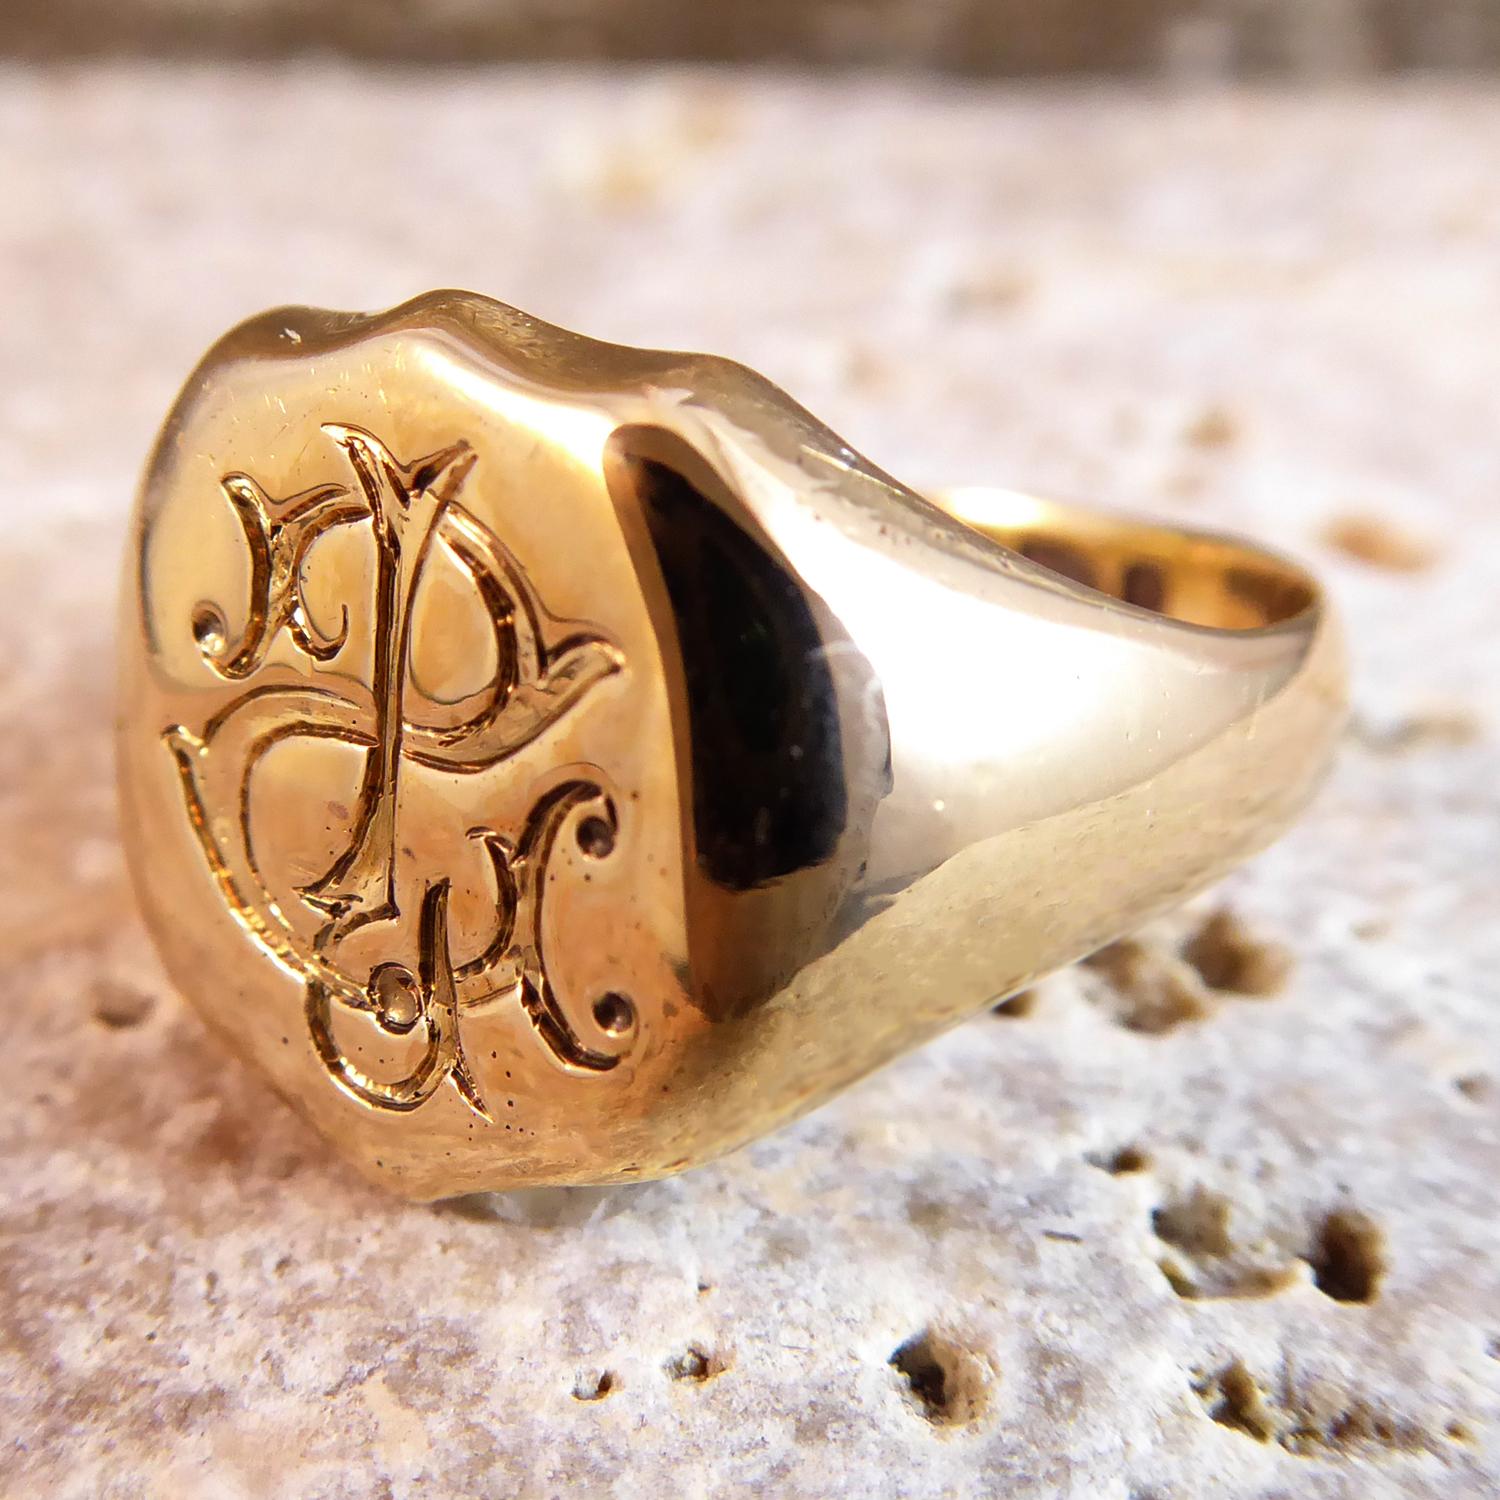 Wonderful antique signet ring with a shield shaped top ornately engraved with the initials J.S. engraved in such a way that the ring would be used as a seal.  the overall maximum measurements of the top of the ring are approx. 0.5